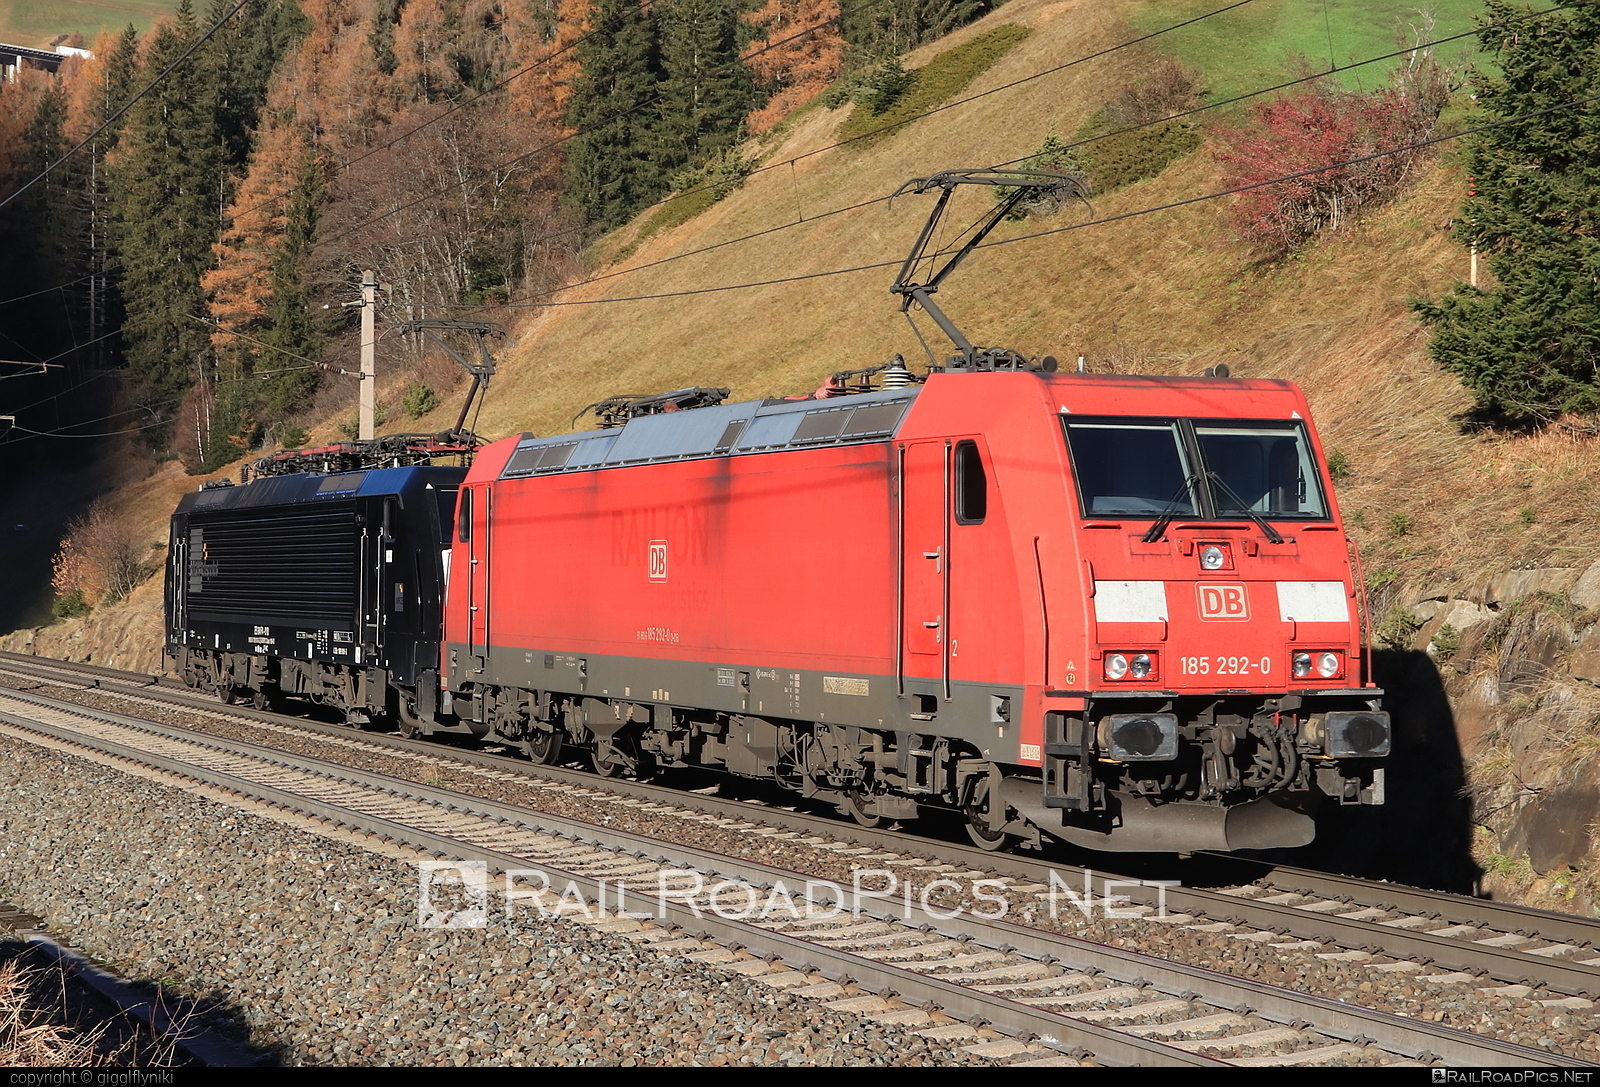 Bombardier TRAXX F140 AC2 - 185 292-0 operated by DB Cargo AG #bombardier #bombardiertraxx #db #dbcargo #dbcargoag #deutschebahn #traxx #traxxf140 #traxxf140ac #traxxf140ac2